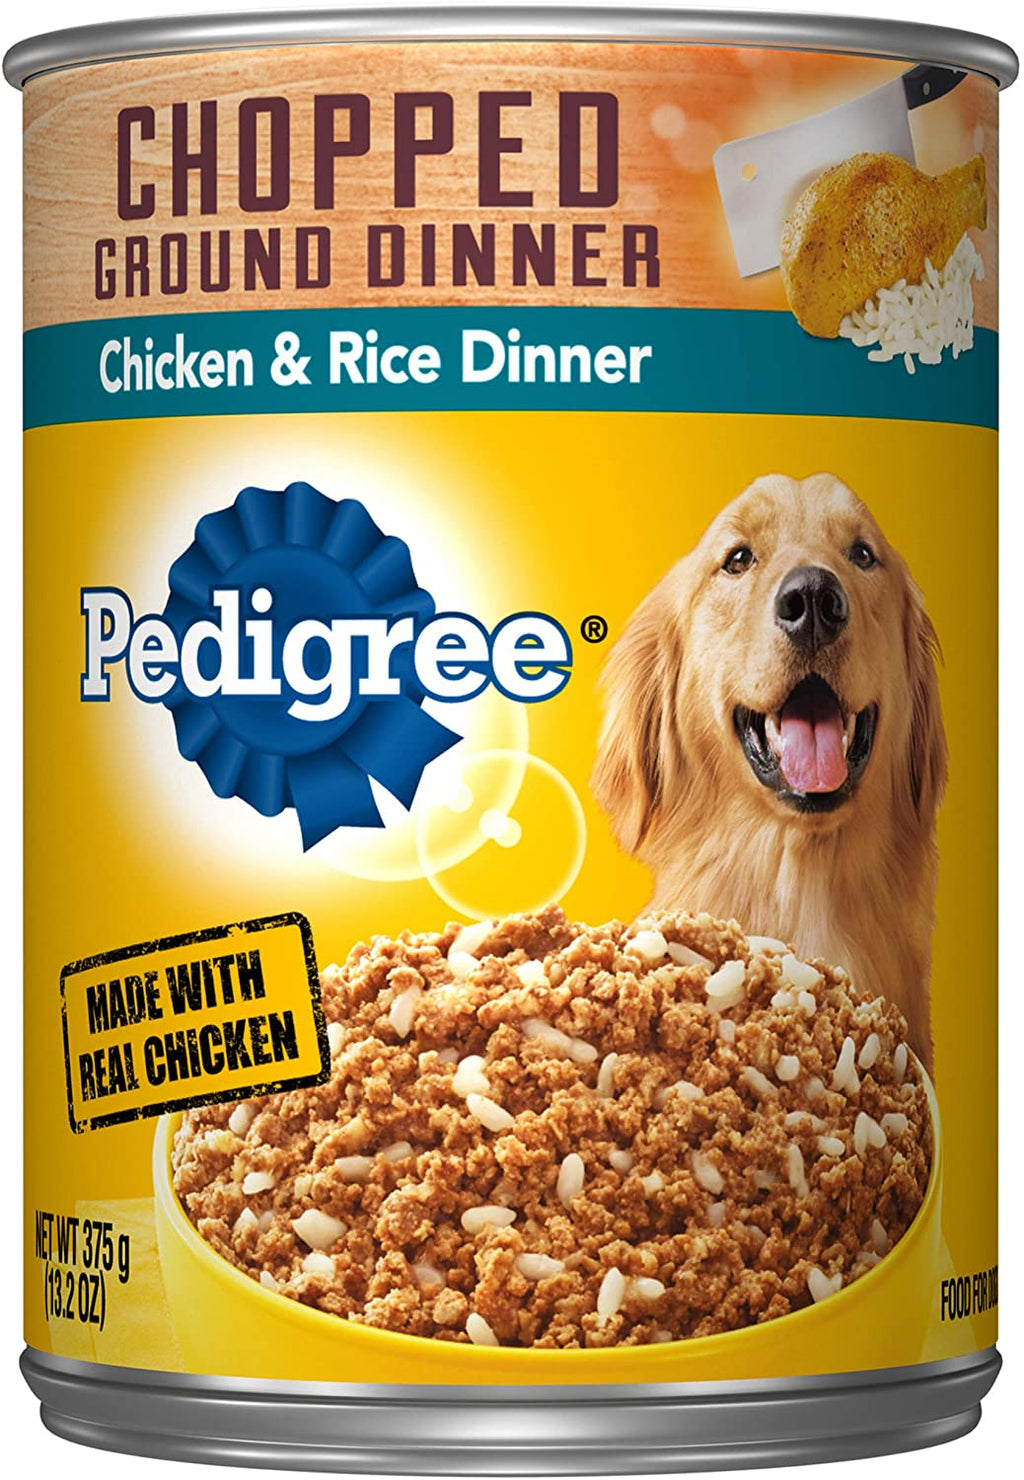 Pedigree Traditional Ground Dinner Chicken and Rice Canned Dog Food - 13.2 oz - Case of...